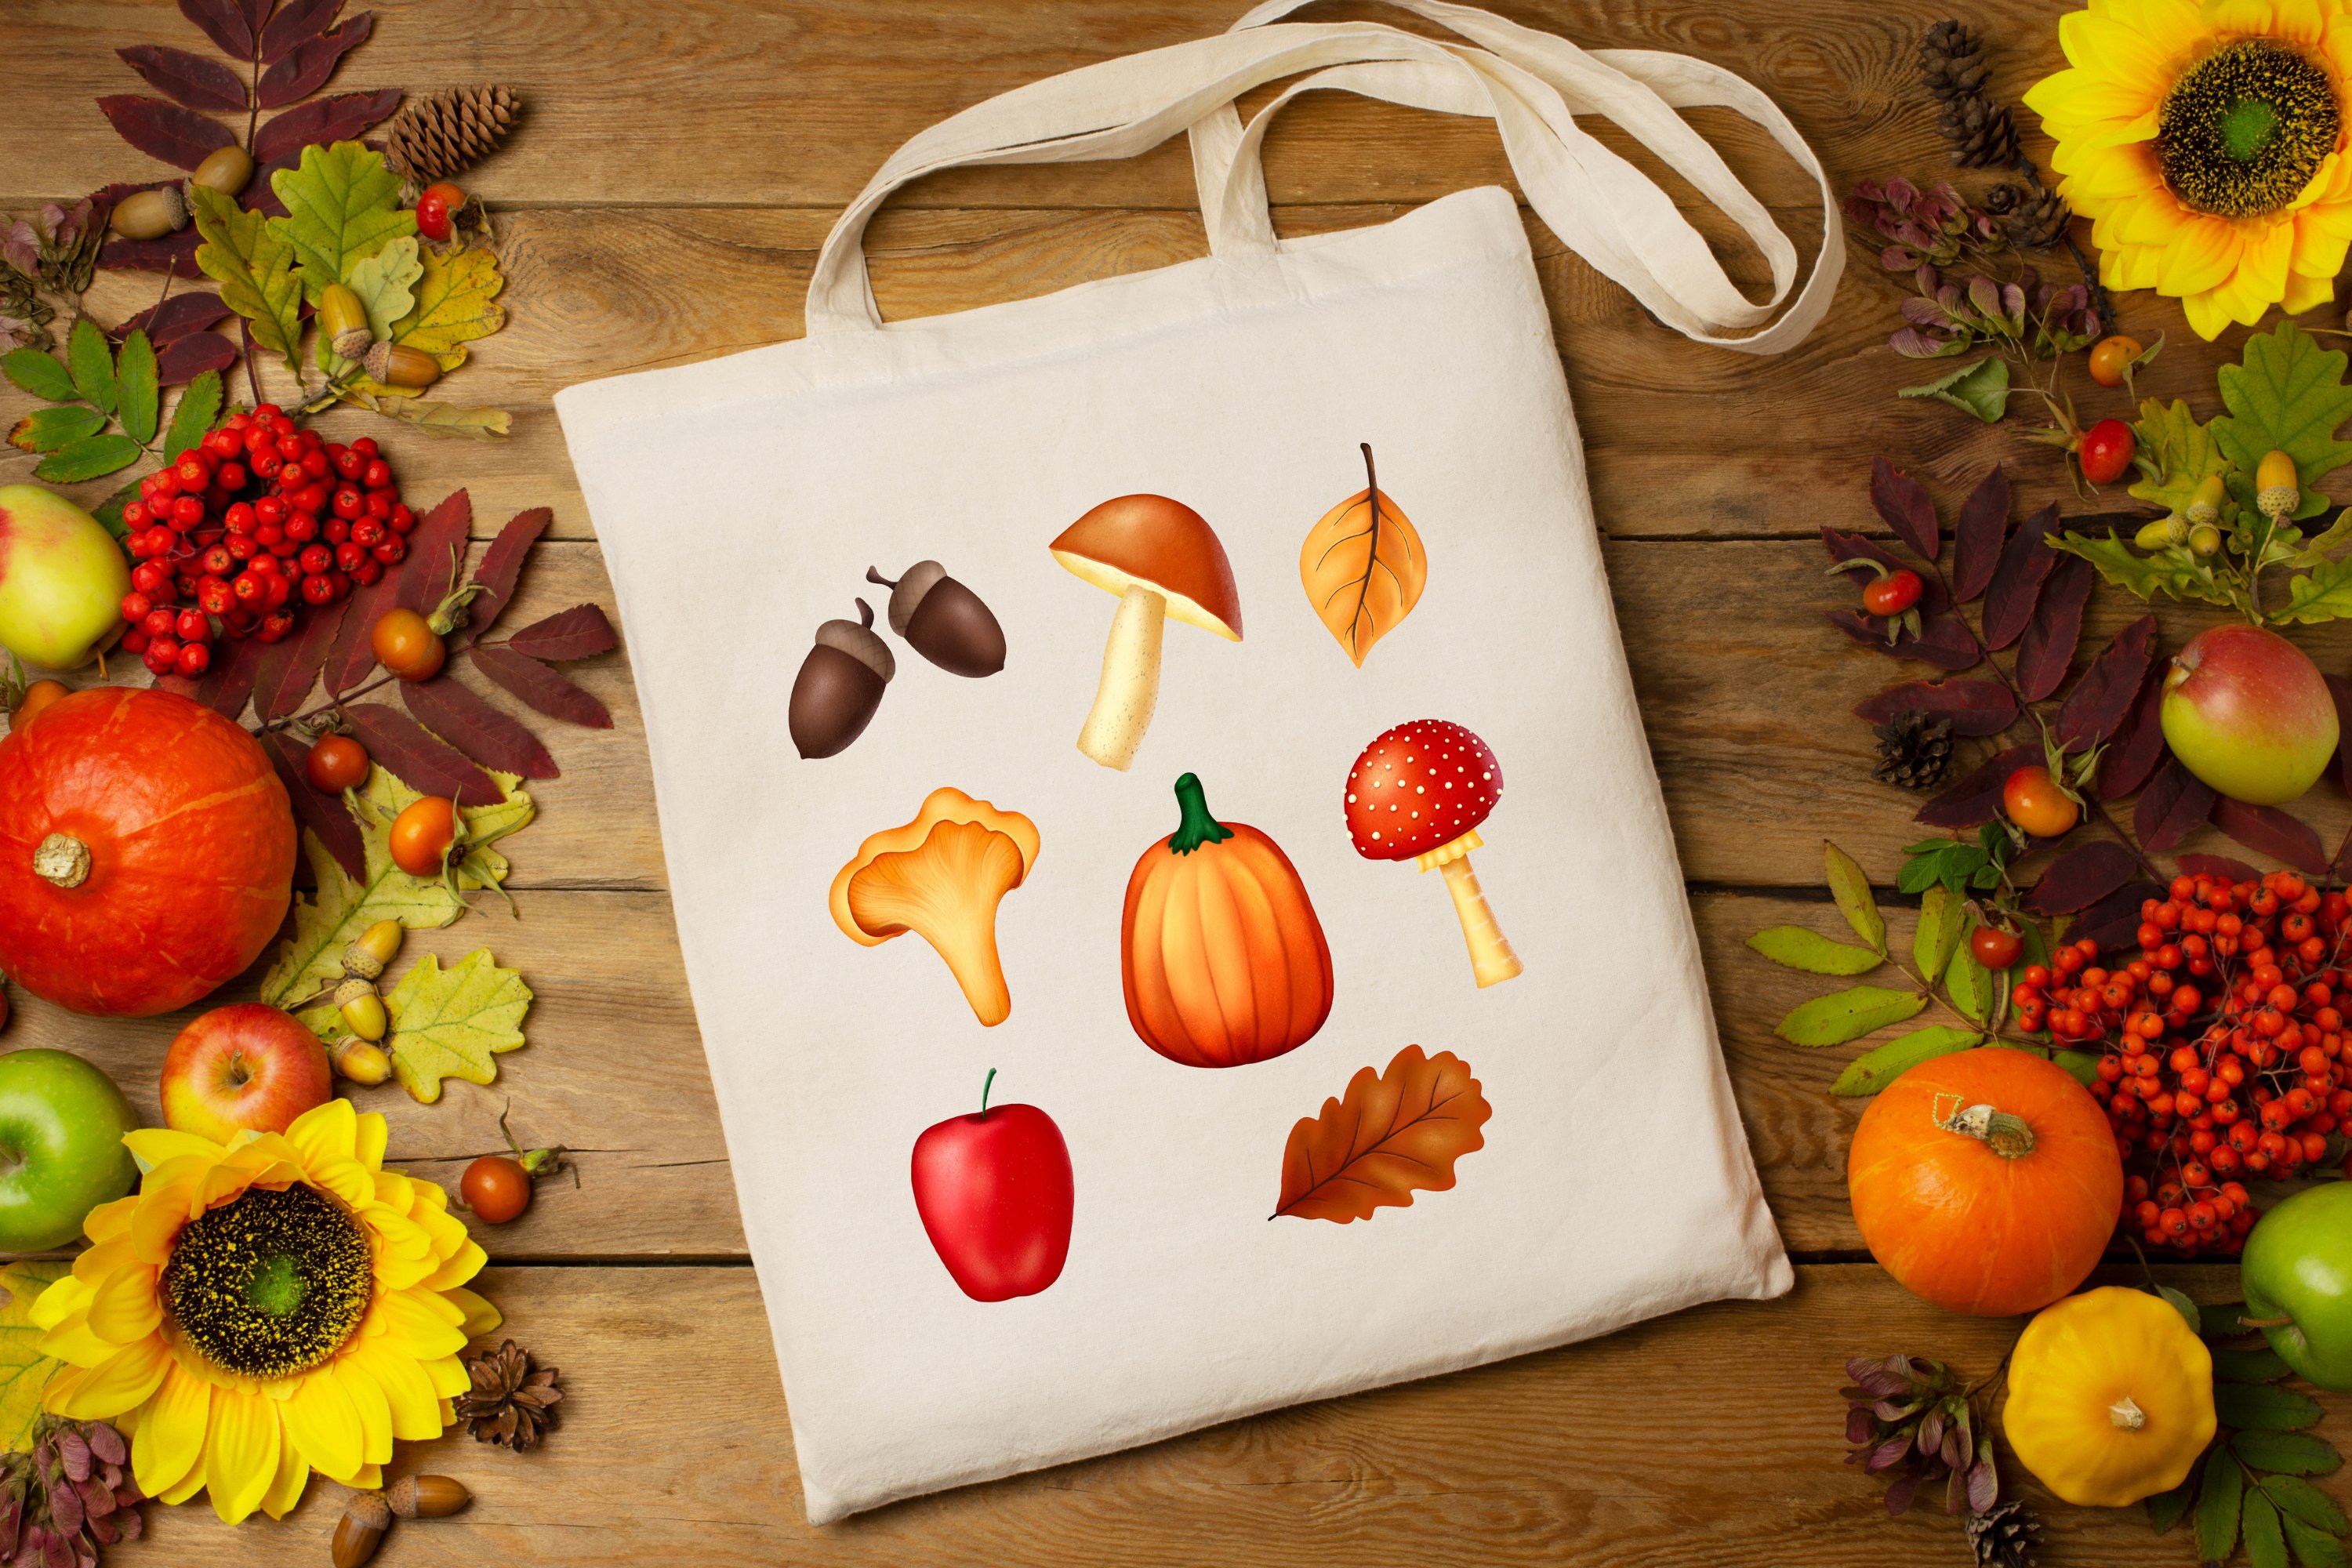 White shopping bag with fall illustrations on the wooden background with fall objects.